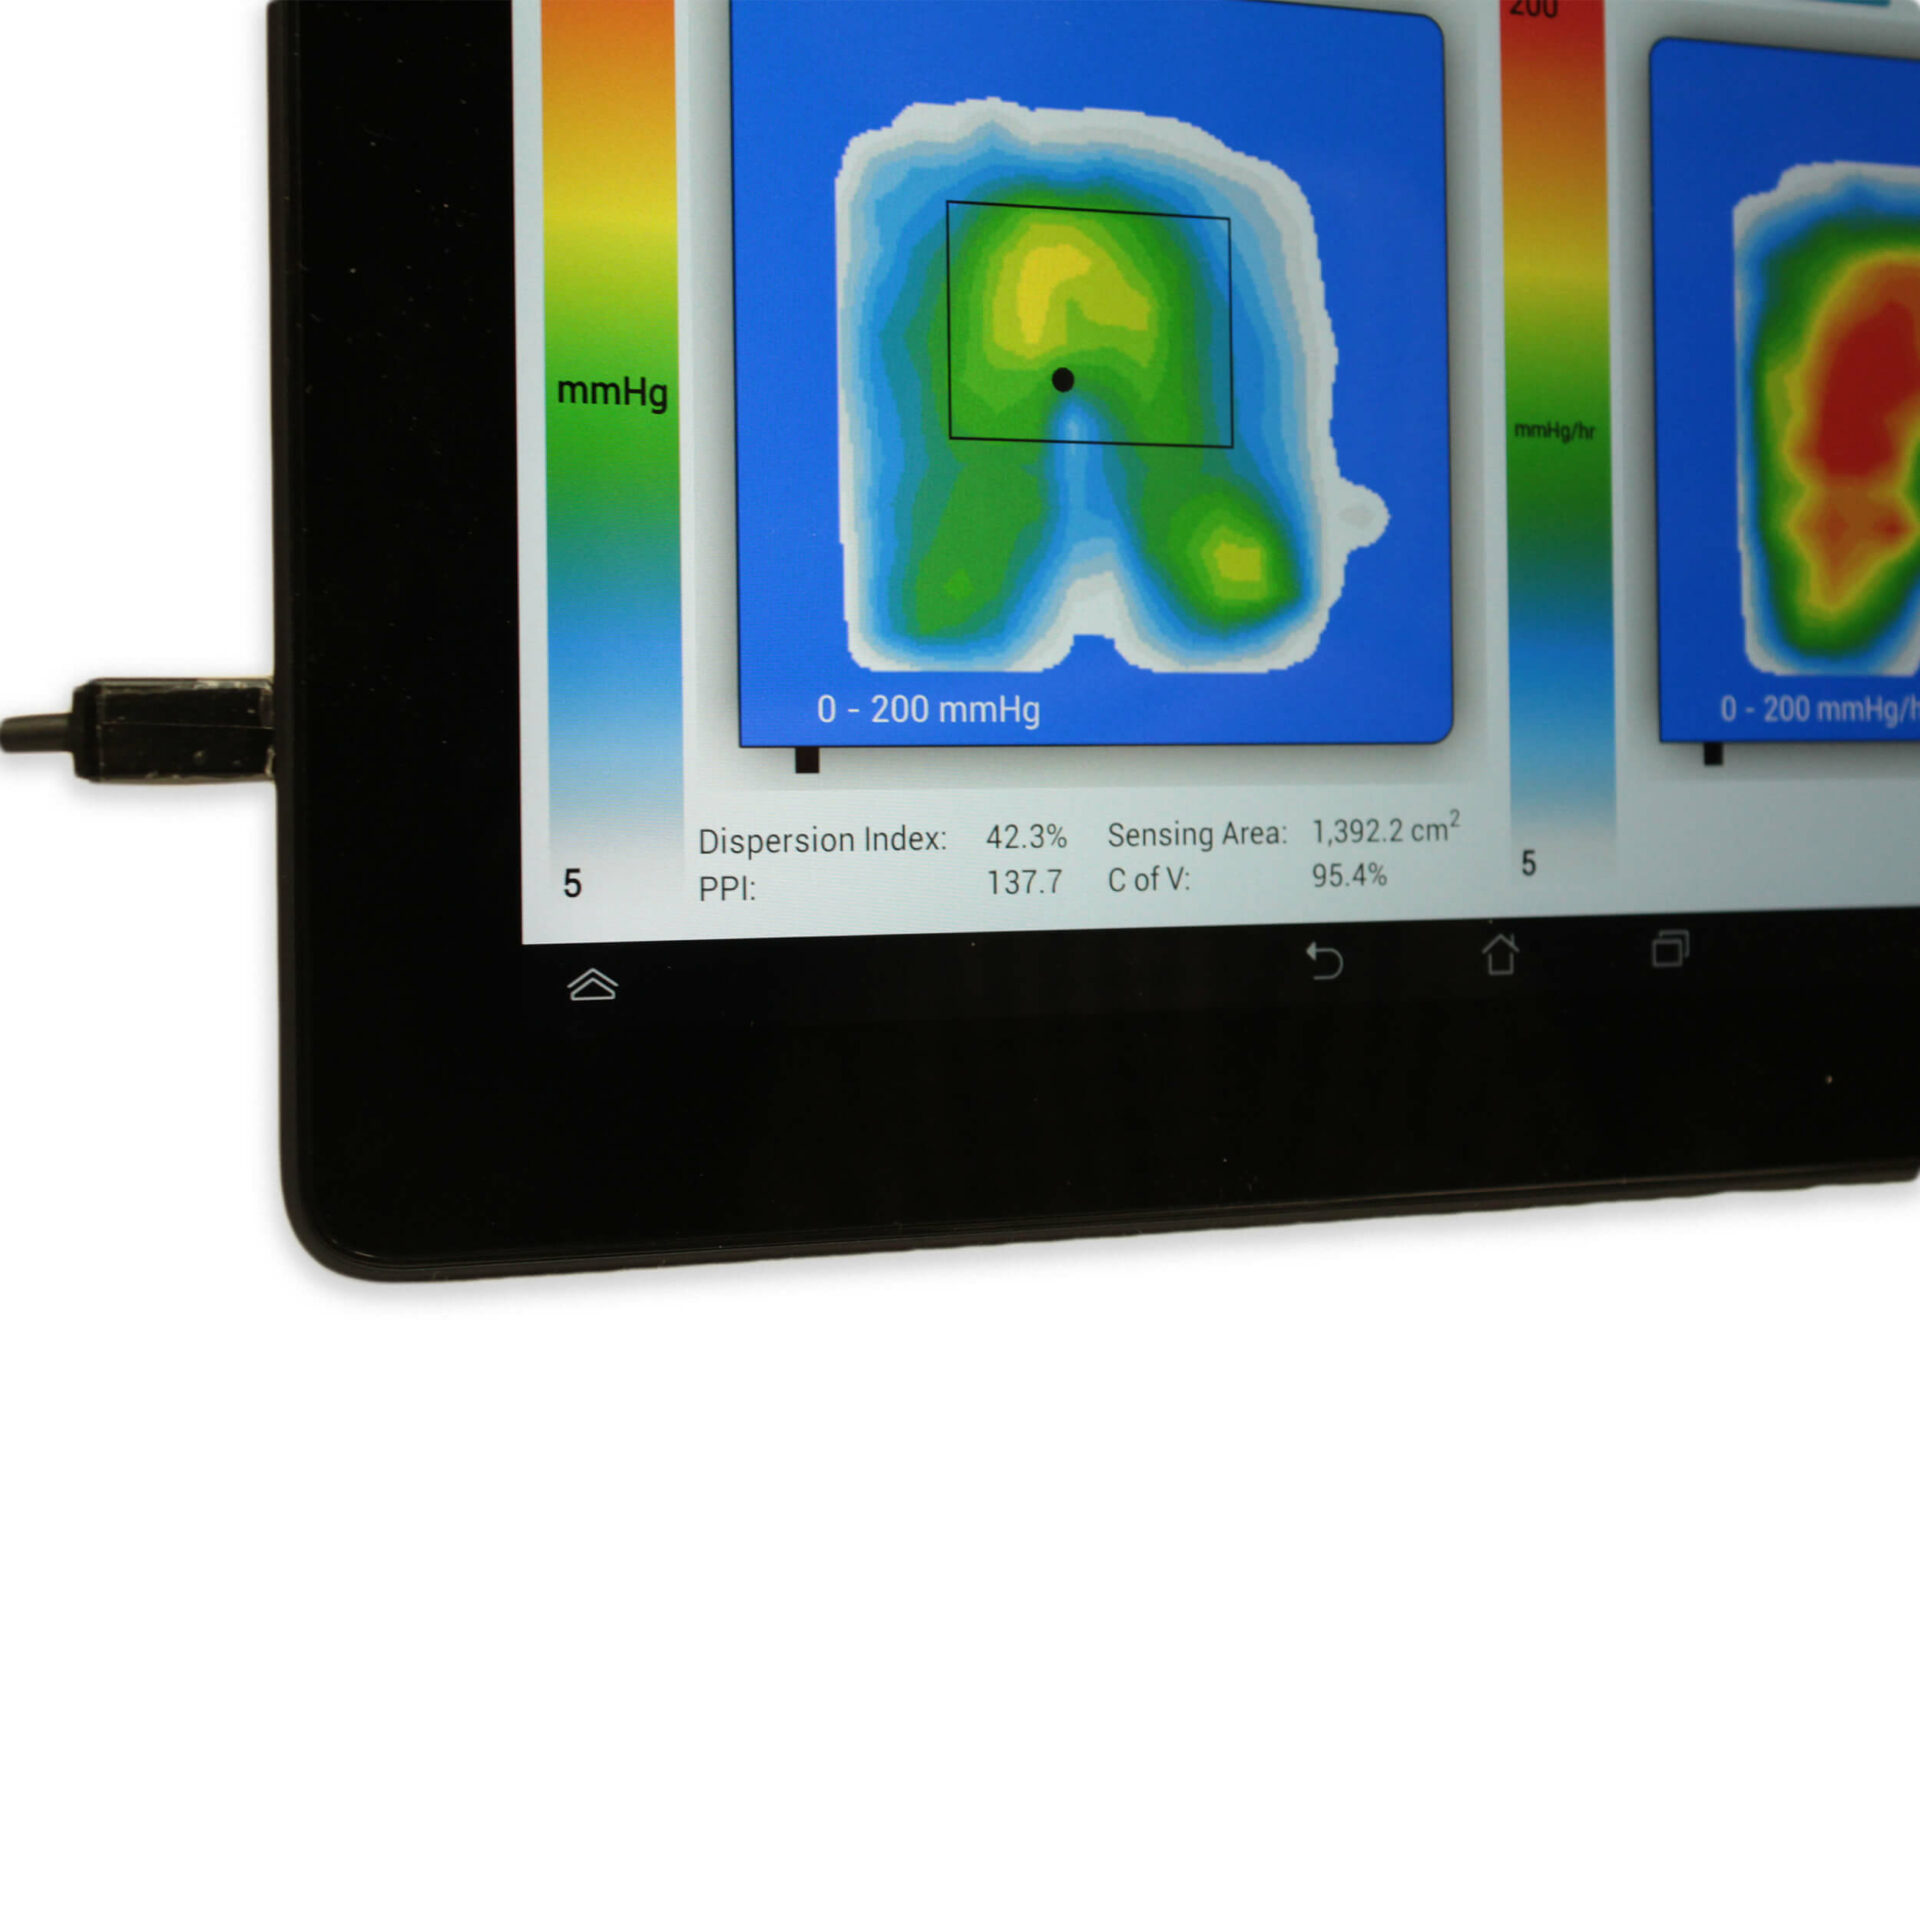 Zoom in of Pressure Mapping on Tablet